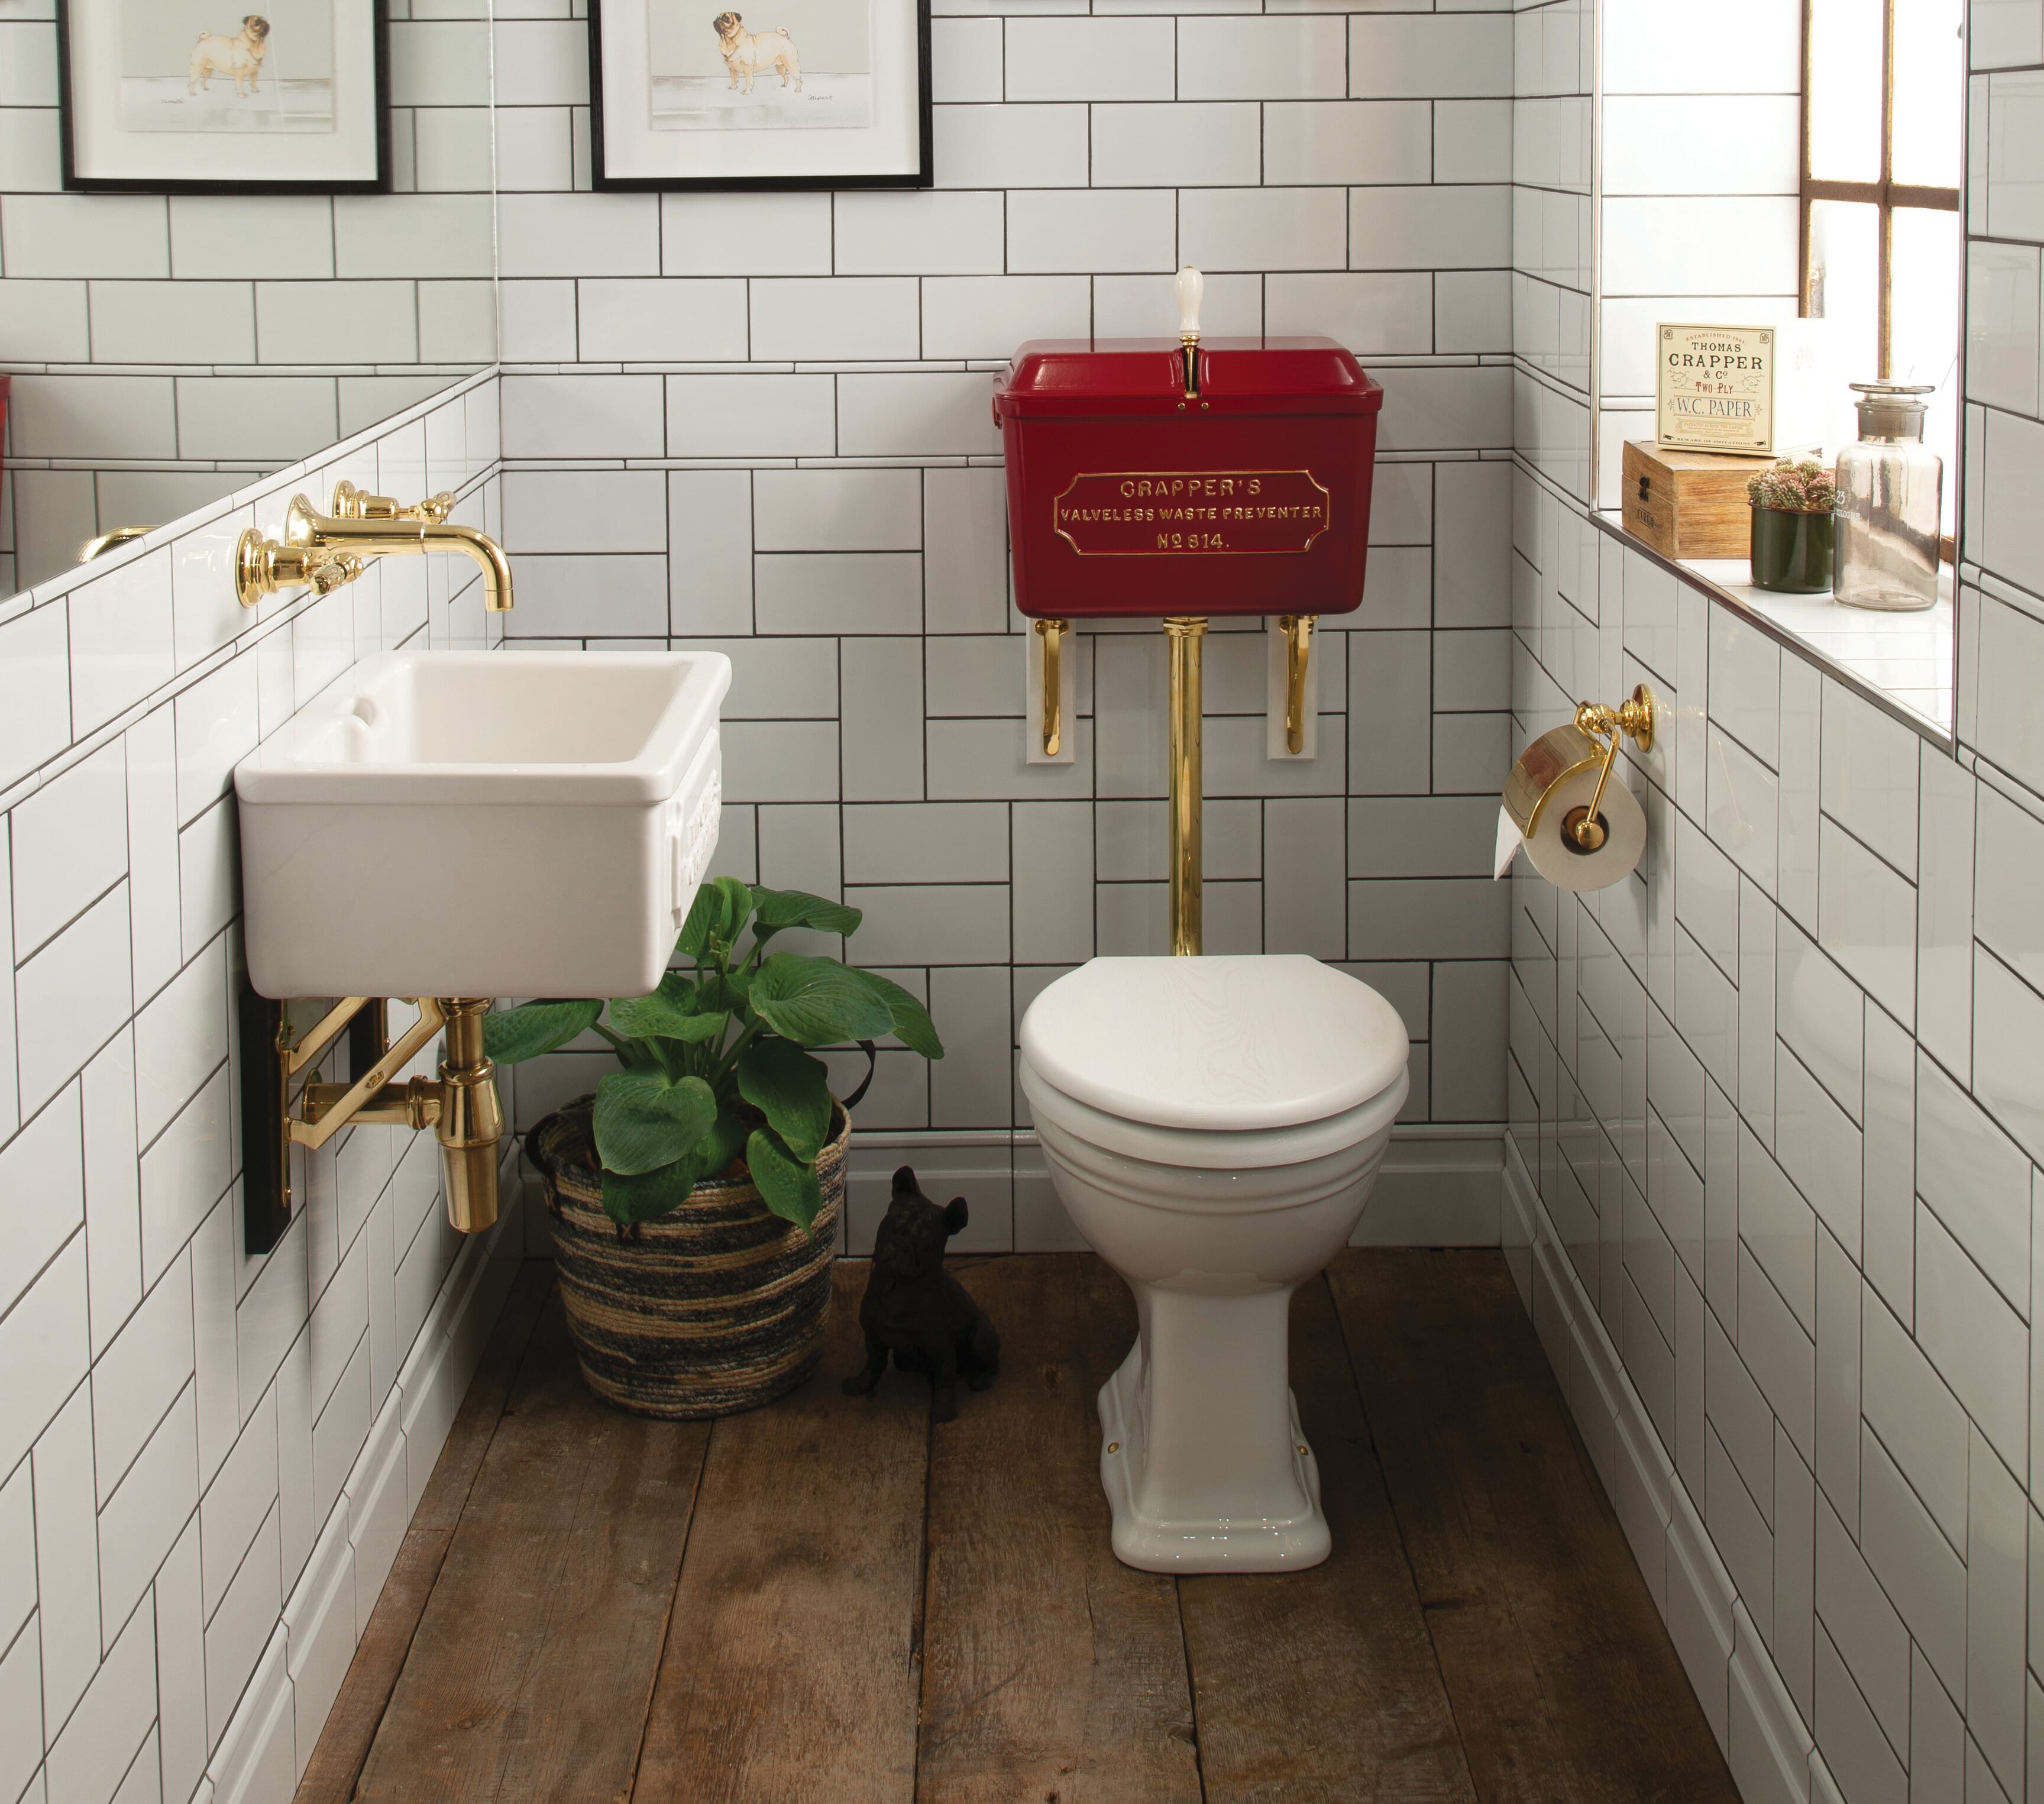 Thomas Crapper High Level Cistern FItted